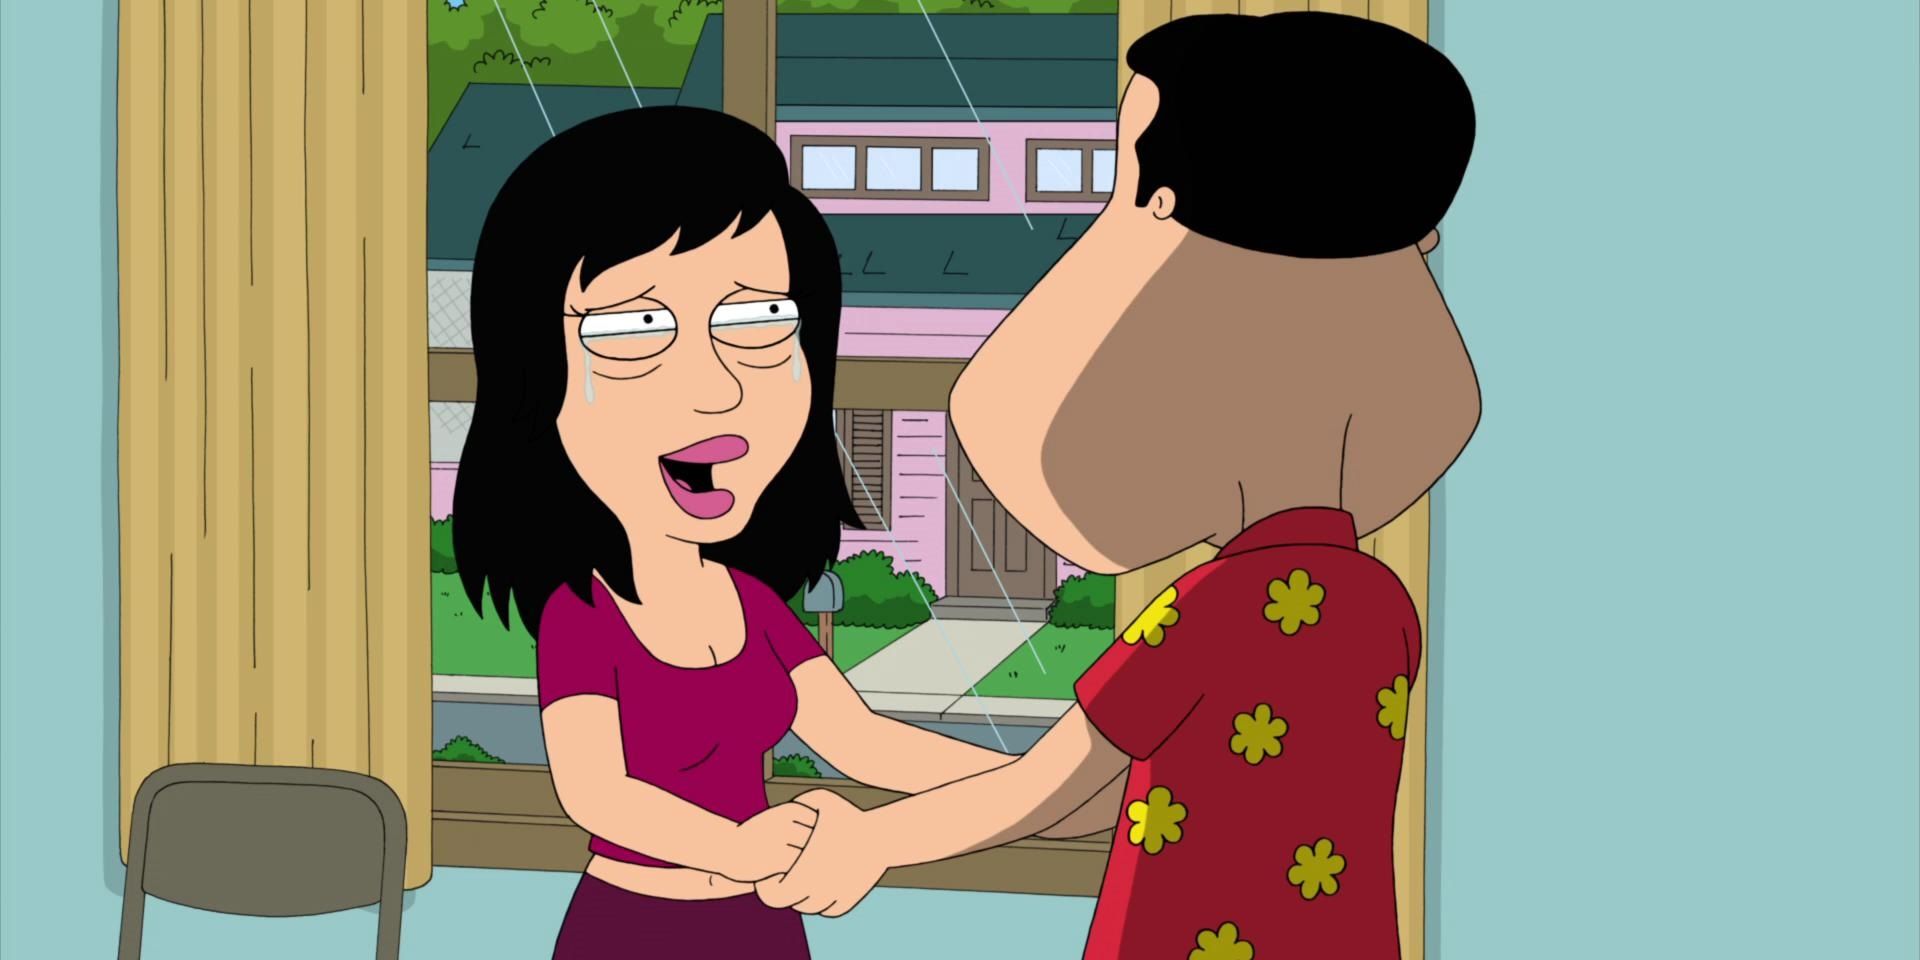 Quagmire holds his siter's hands in Family Guy.